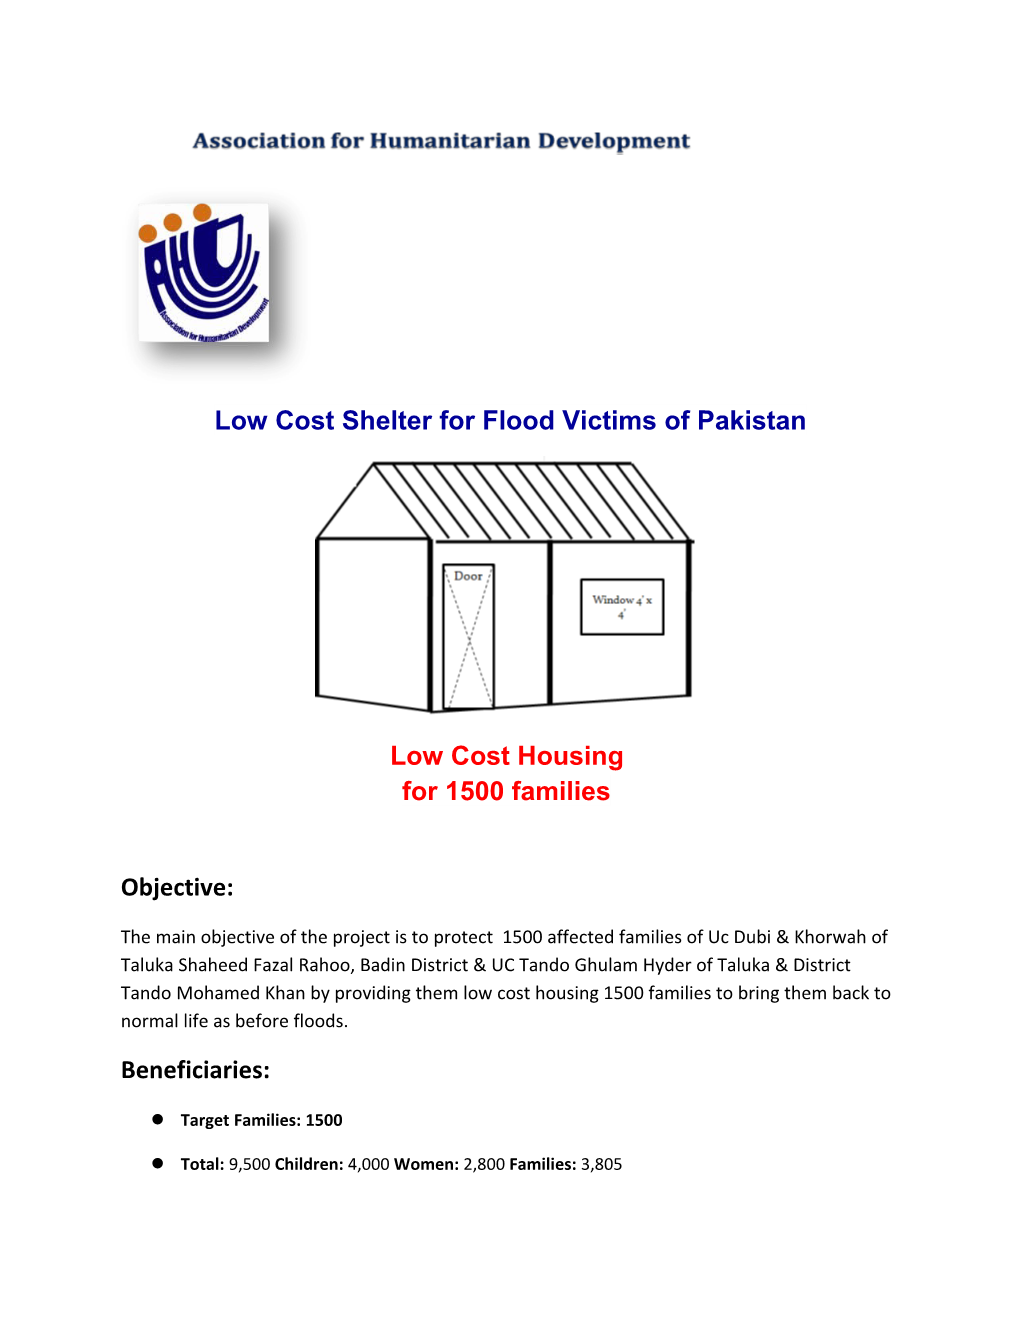 Low Cost Shelter for Flood Victims of Pakistan